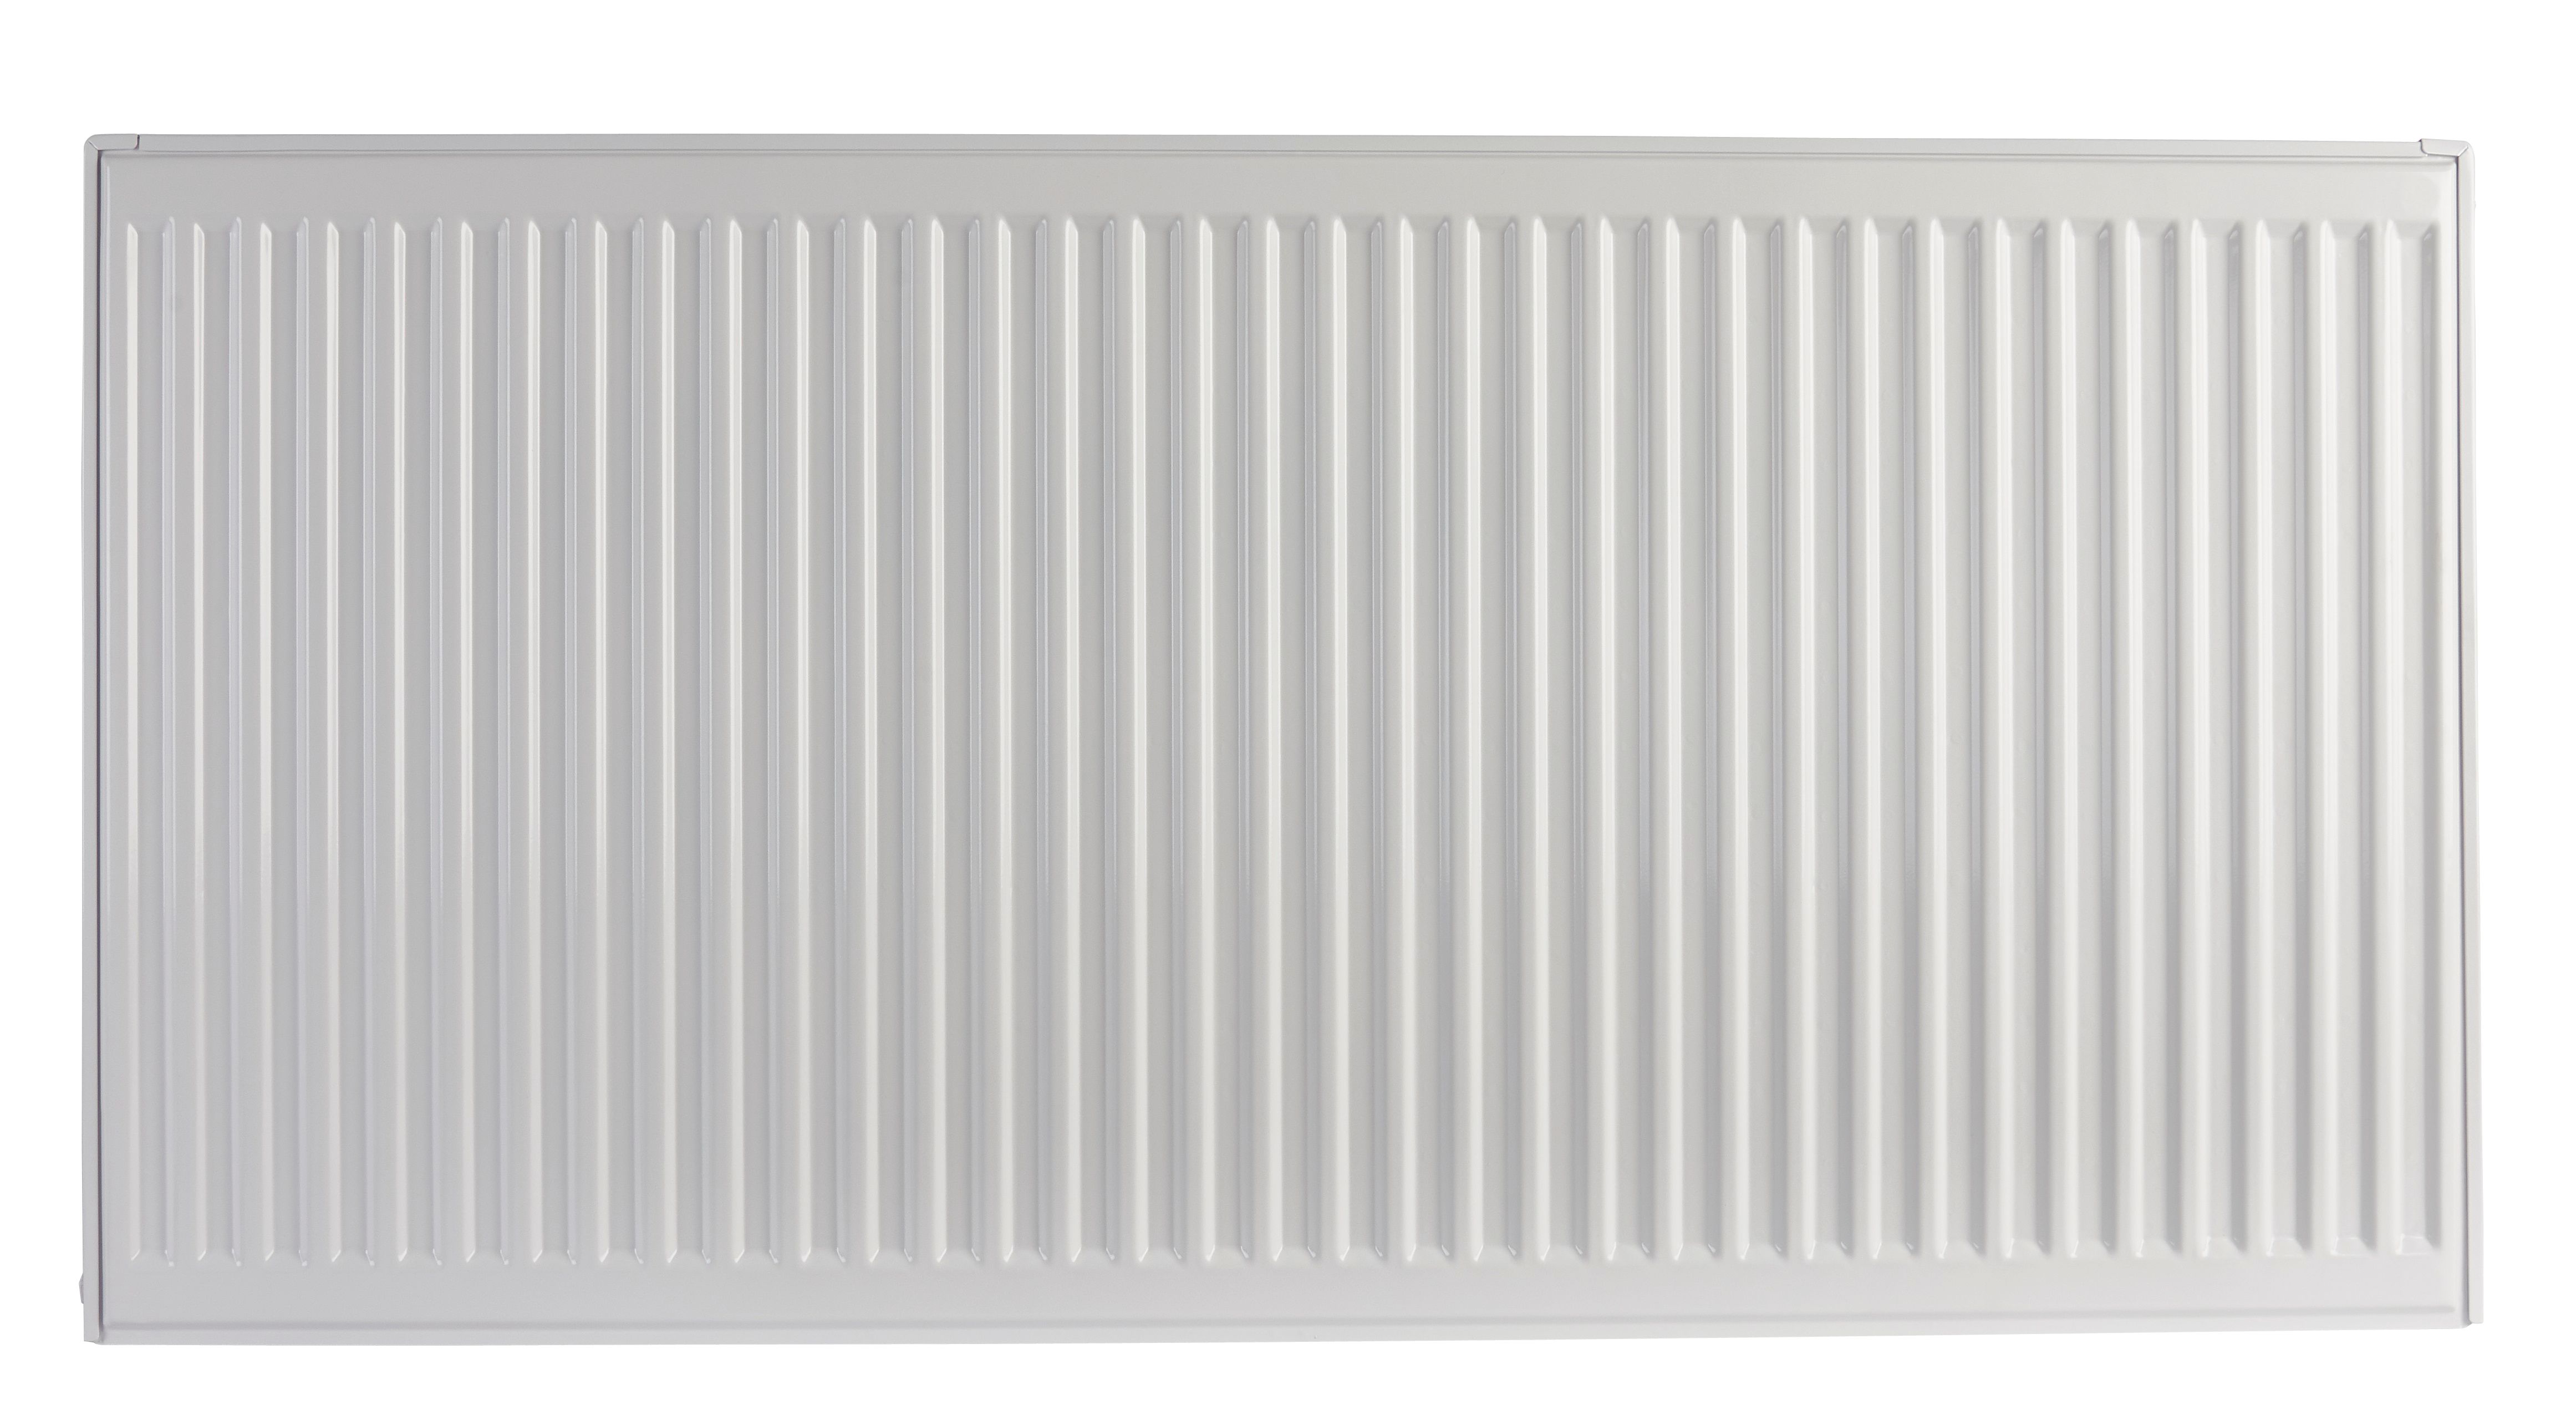 Image of Homeline by Stelrad 600 x 1600mm Type 11 Single Panel Single Convector Radiator